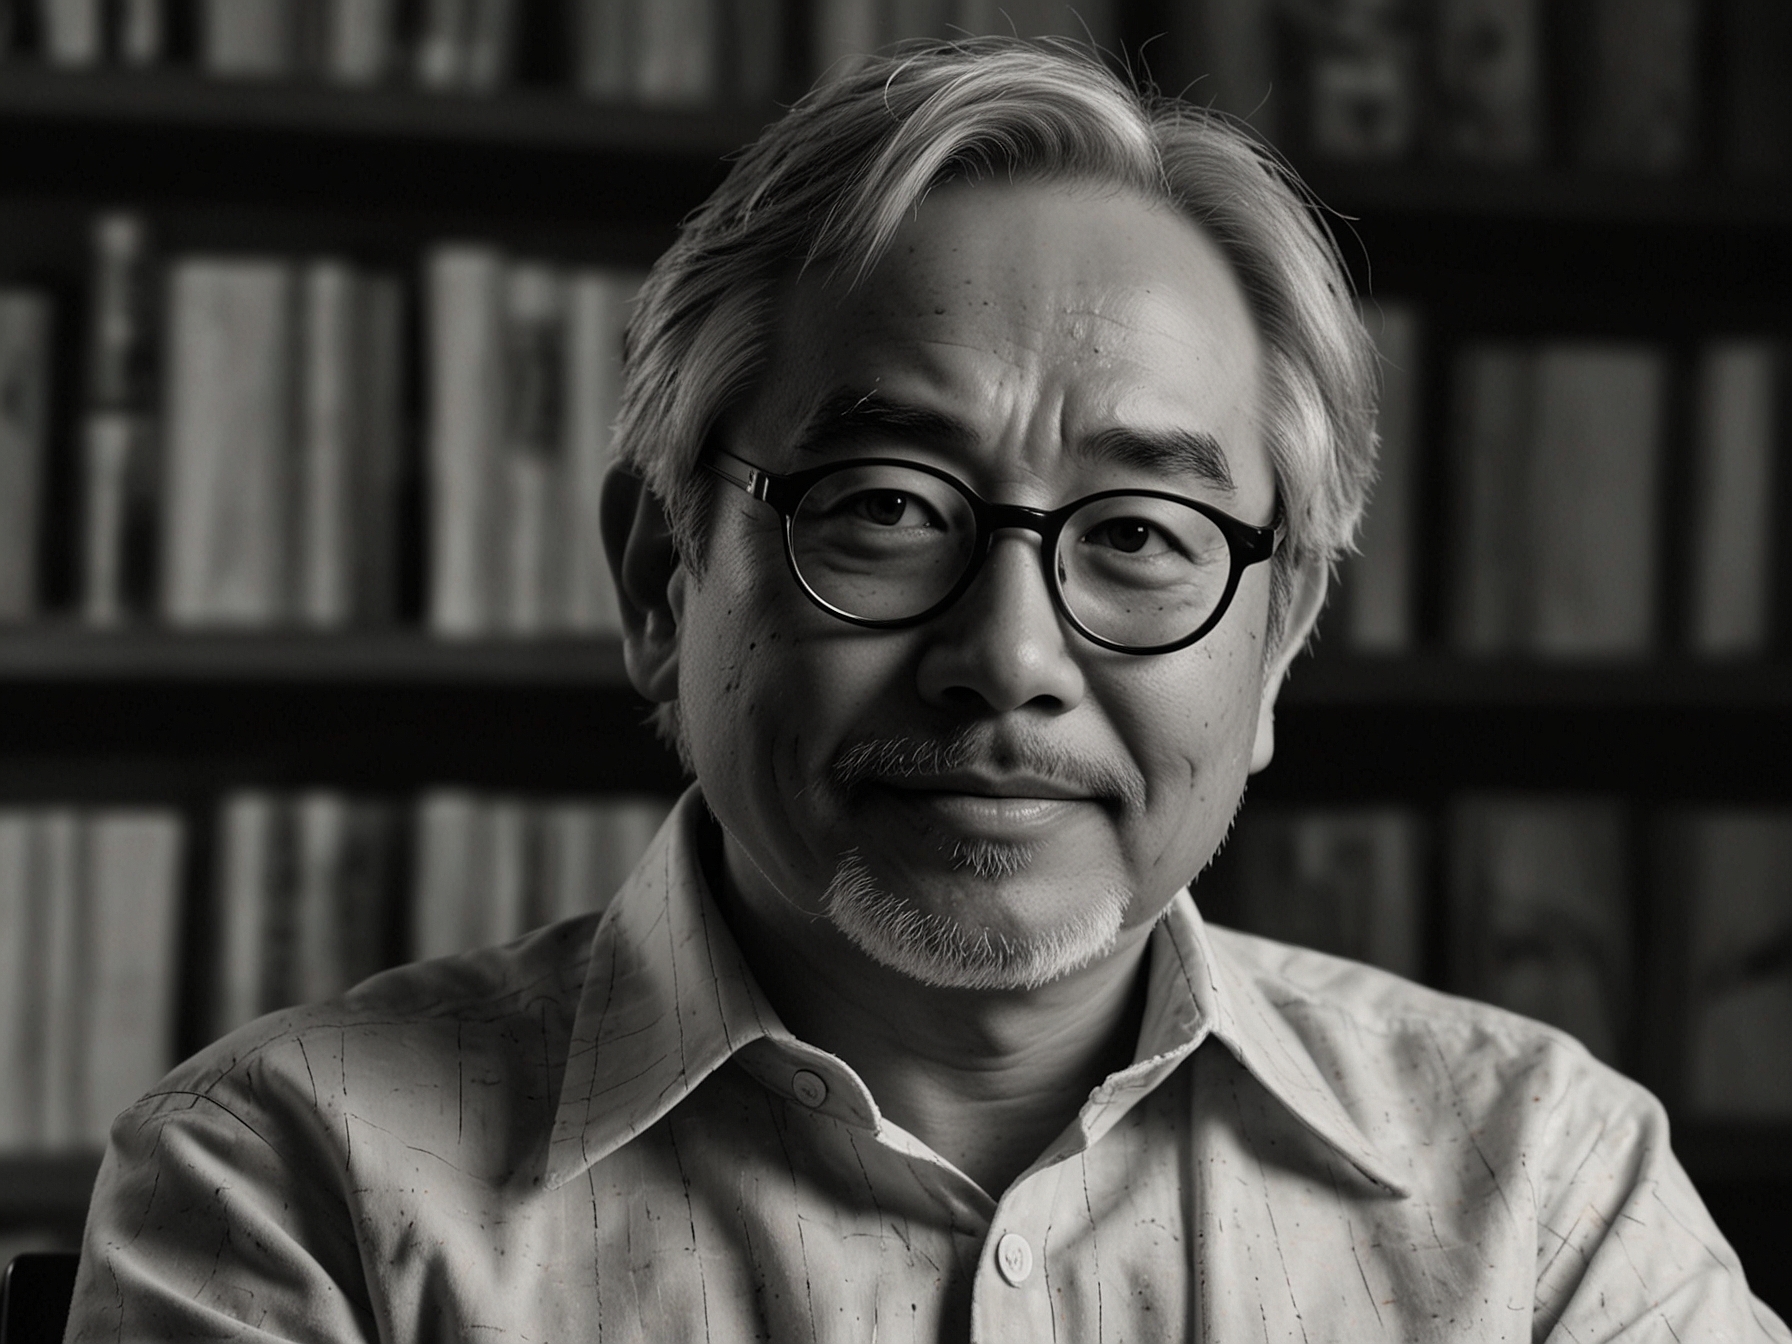 Hidetaka Miyazaki in an interview, discussing his potential venture into creating a traditional JRPG, showcasing his passion for game design and storytelling.